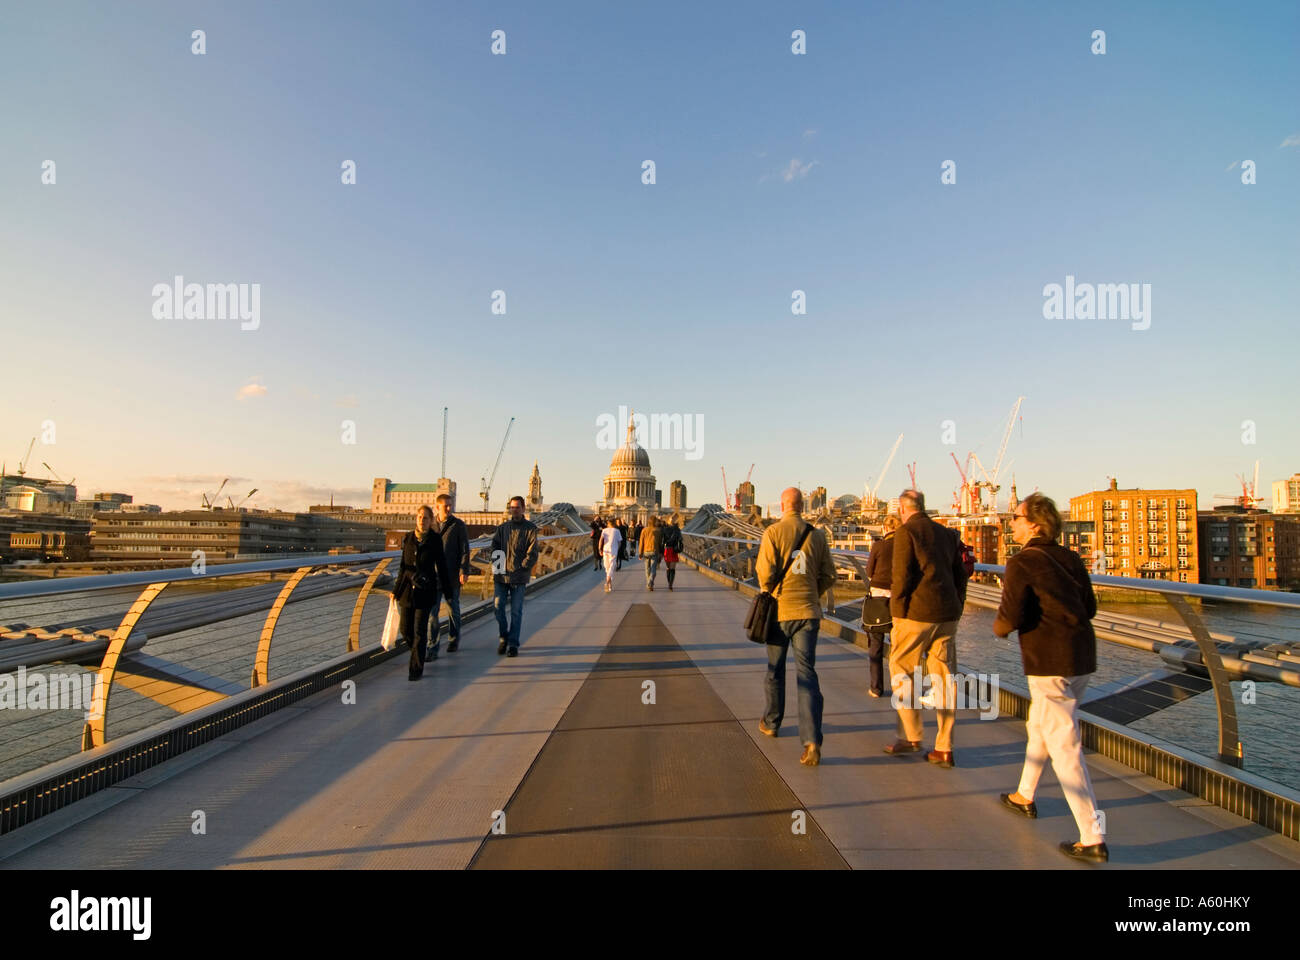 Horizontal wide angle view of the Millennium Bridge across the River Thames and St Paul's Cathedral on a sunny evening. Stock Photo